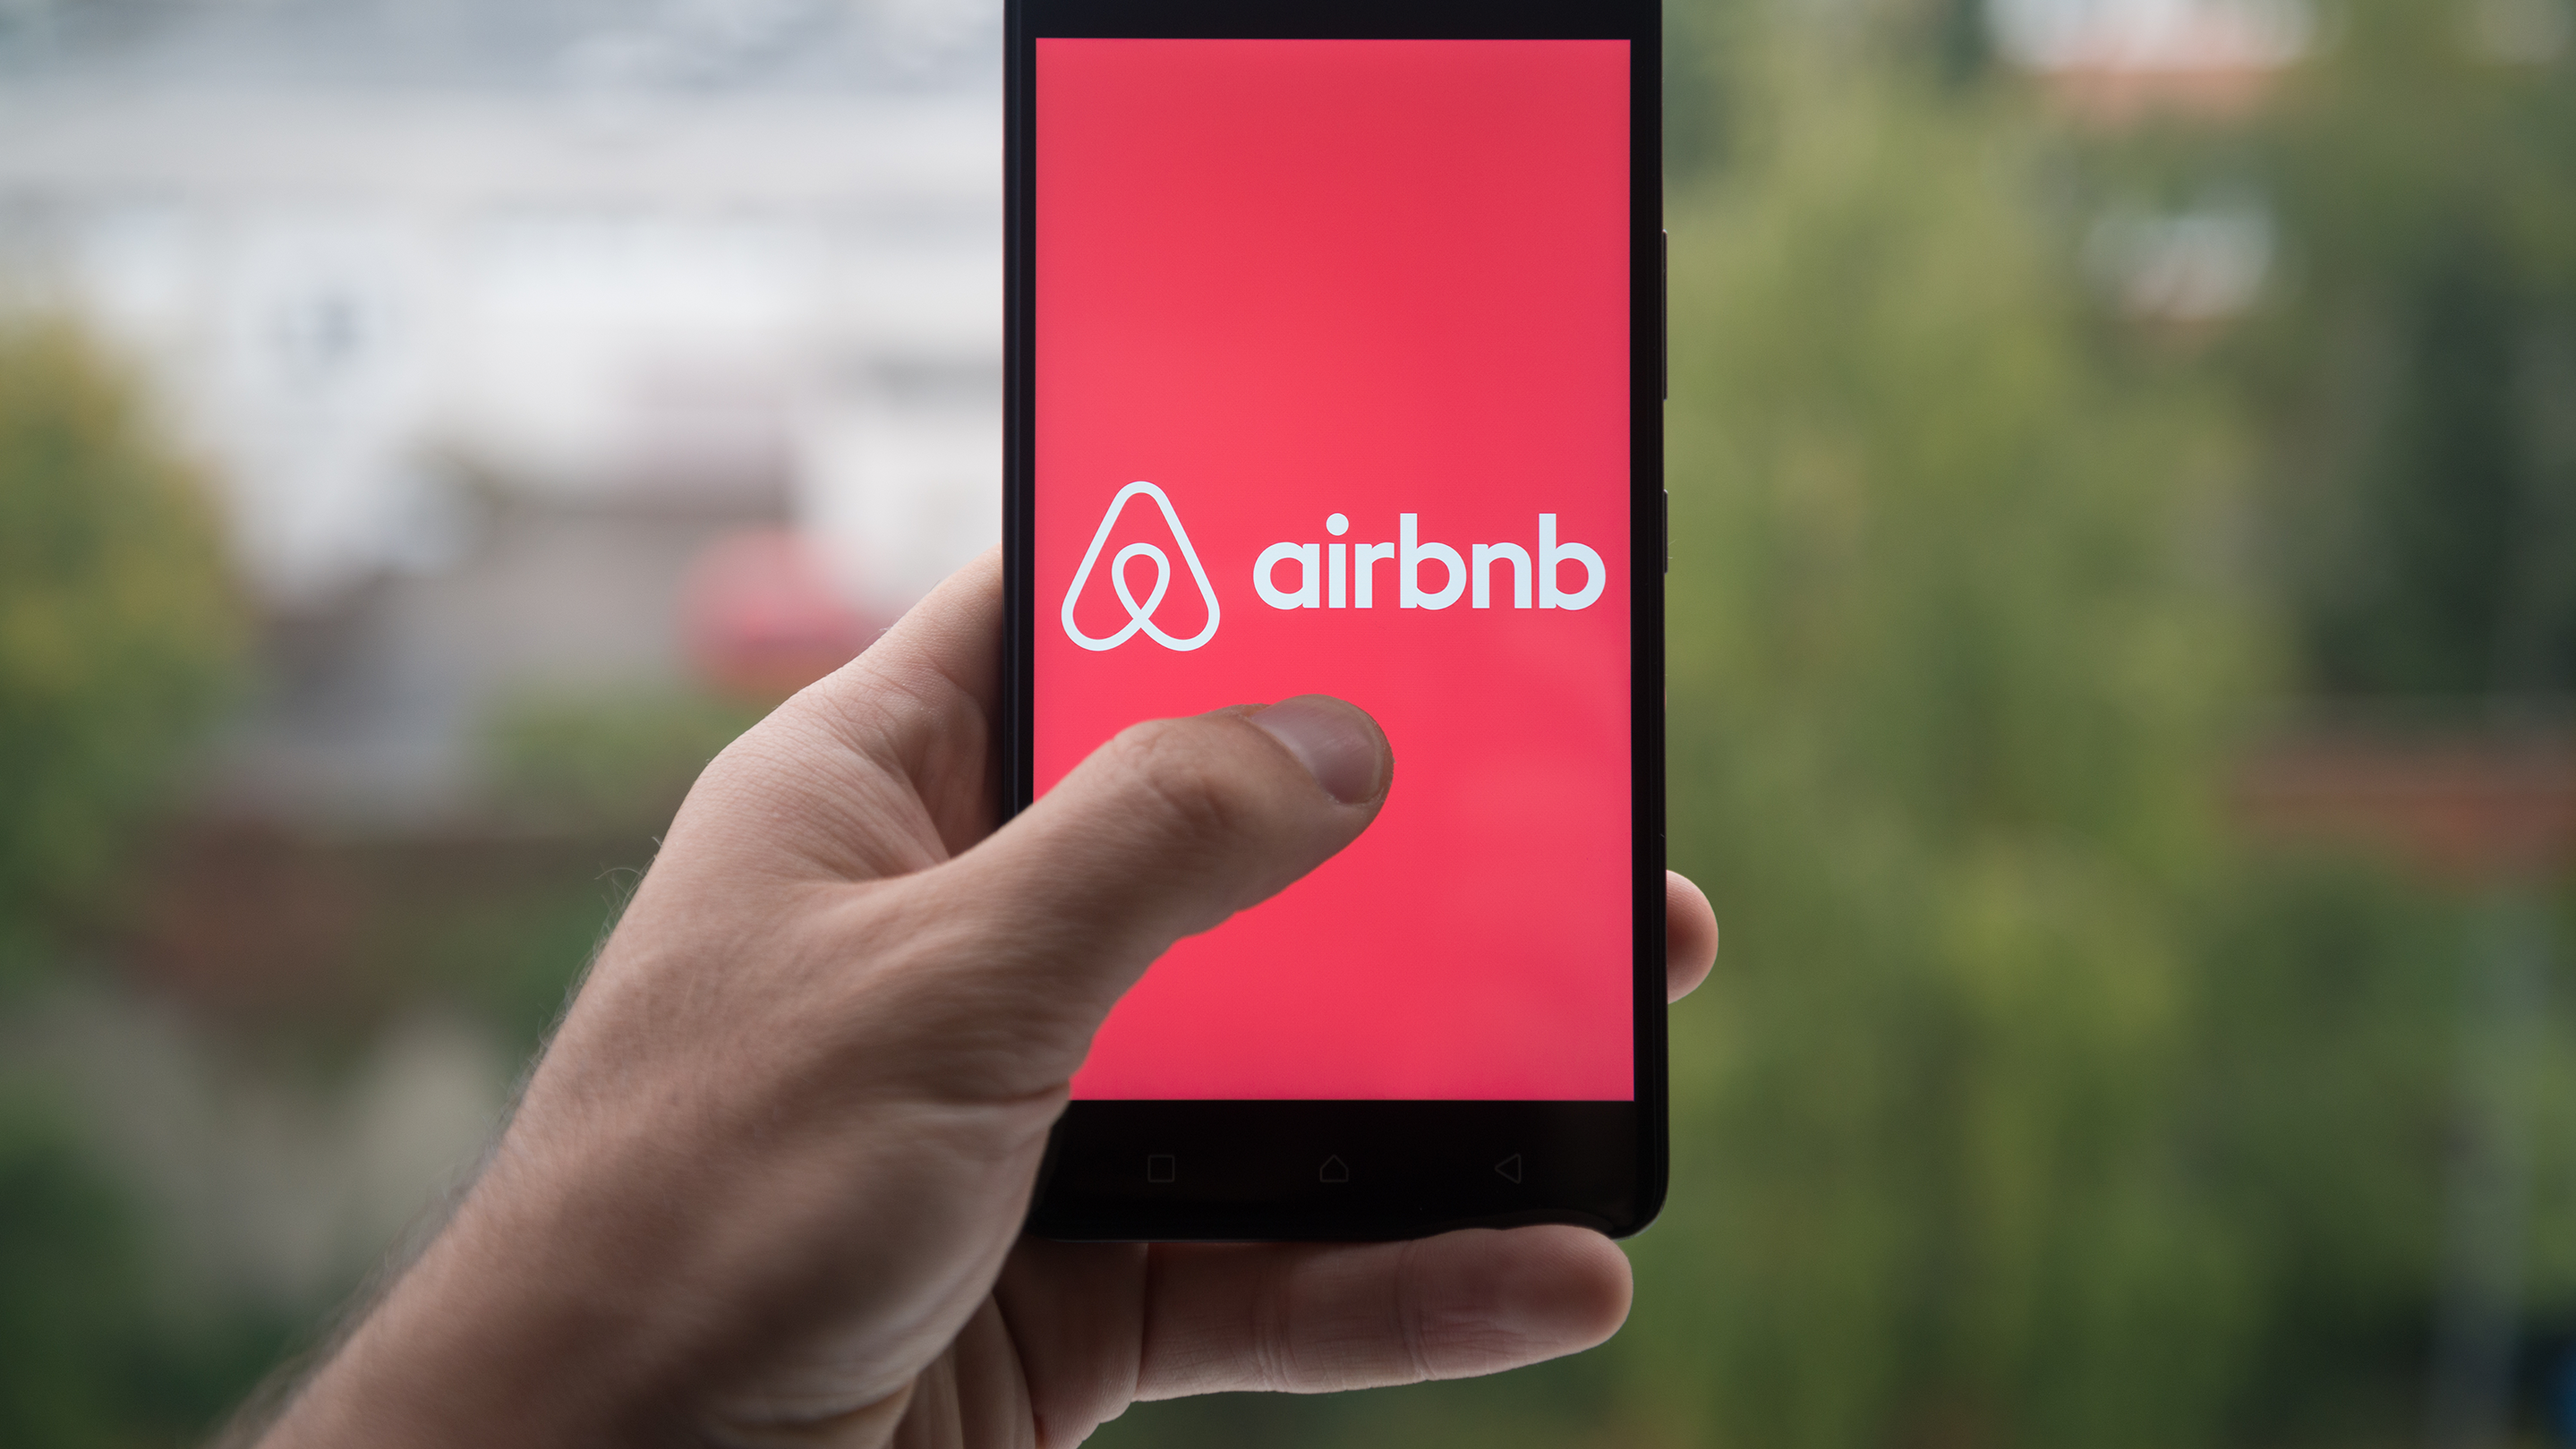 A guide to Airbnb letting in property managed buildings